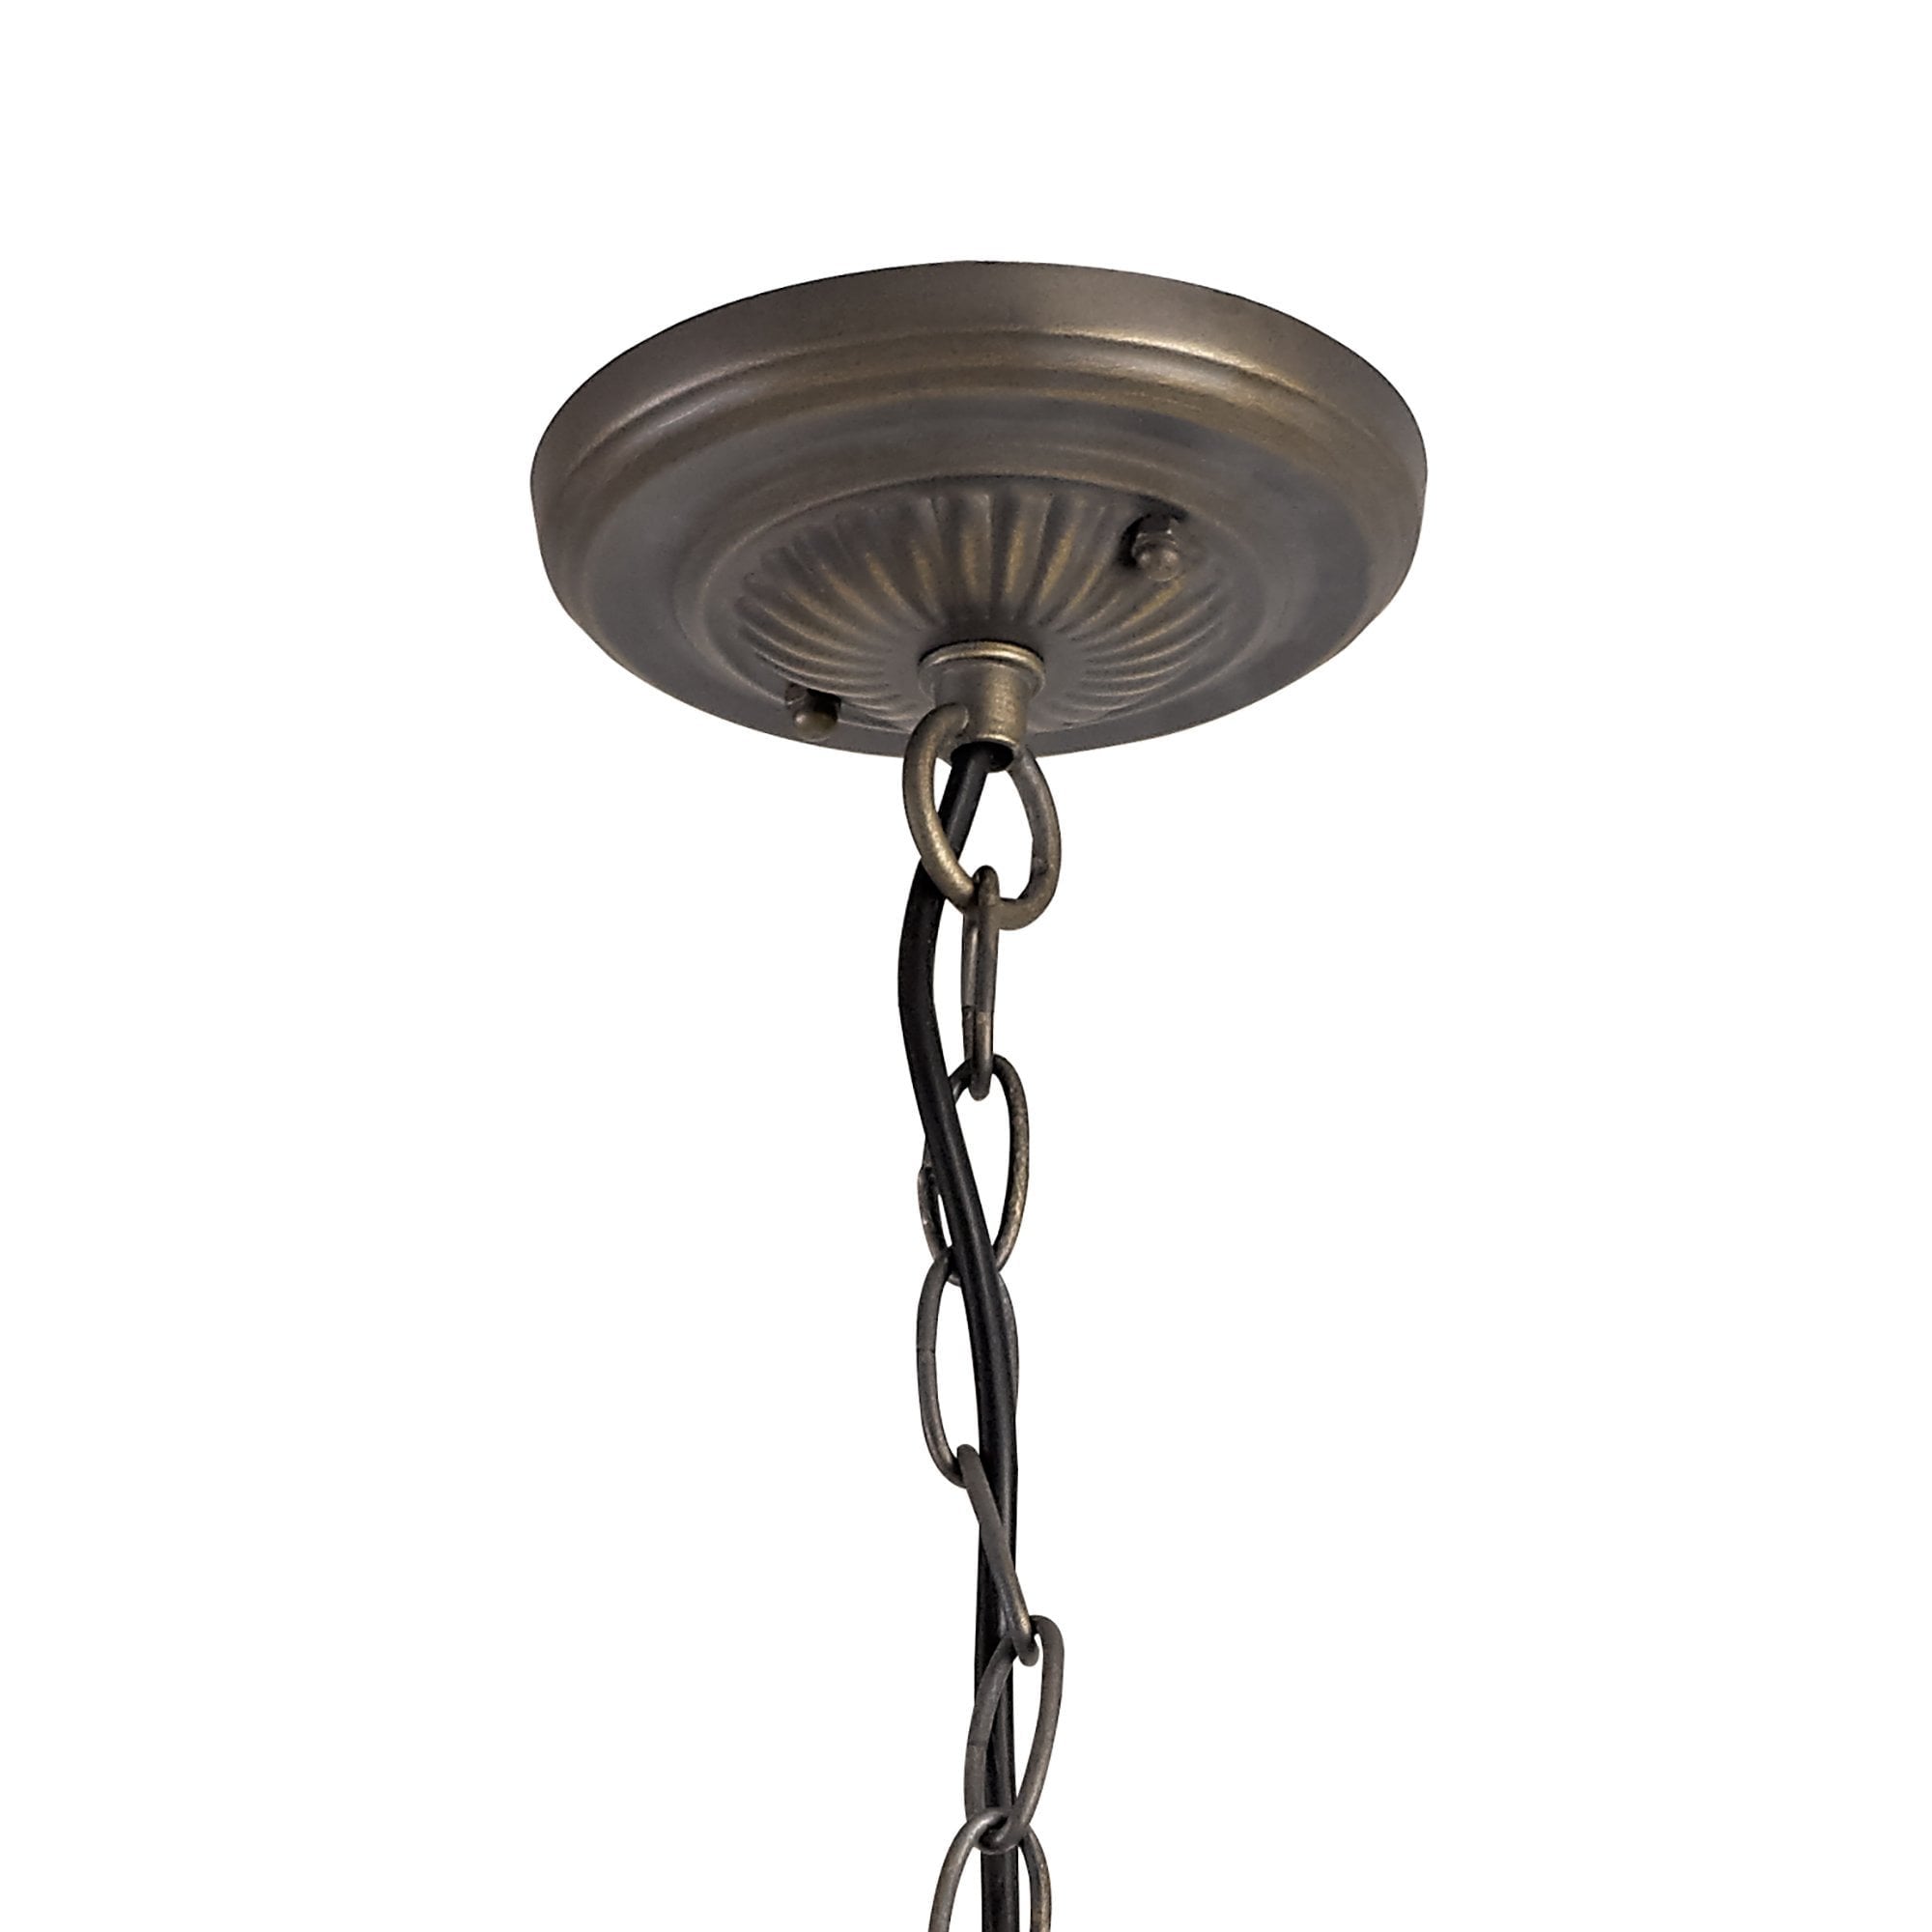 3 Light Downlighter Pendant E27 With 40cm Tiffany Shade, Blue/Cream/Crystal/Aged Antique Brass